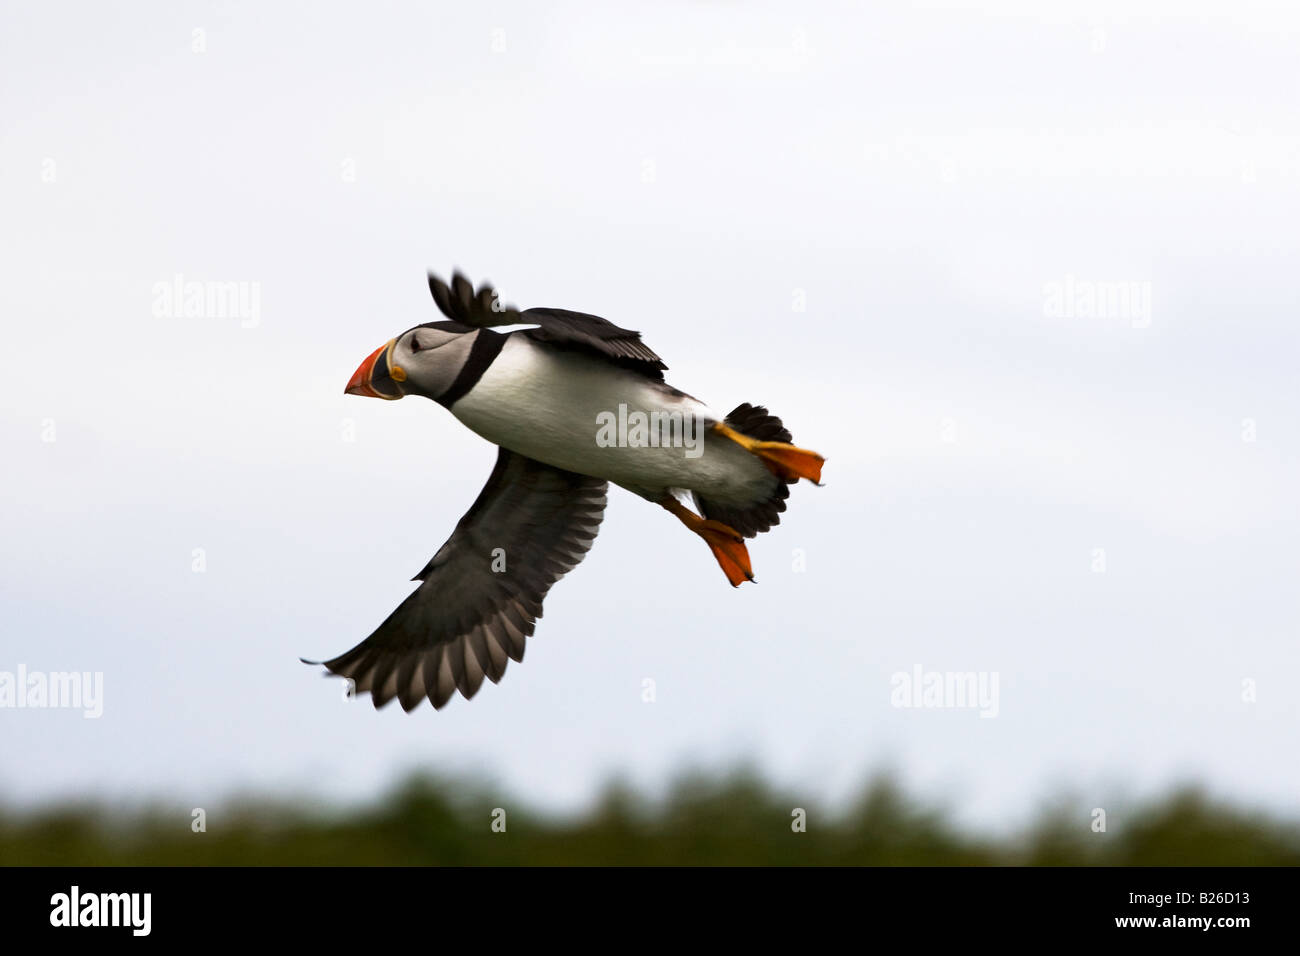 Puffin flying  in sky. Stock Photo